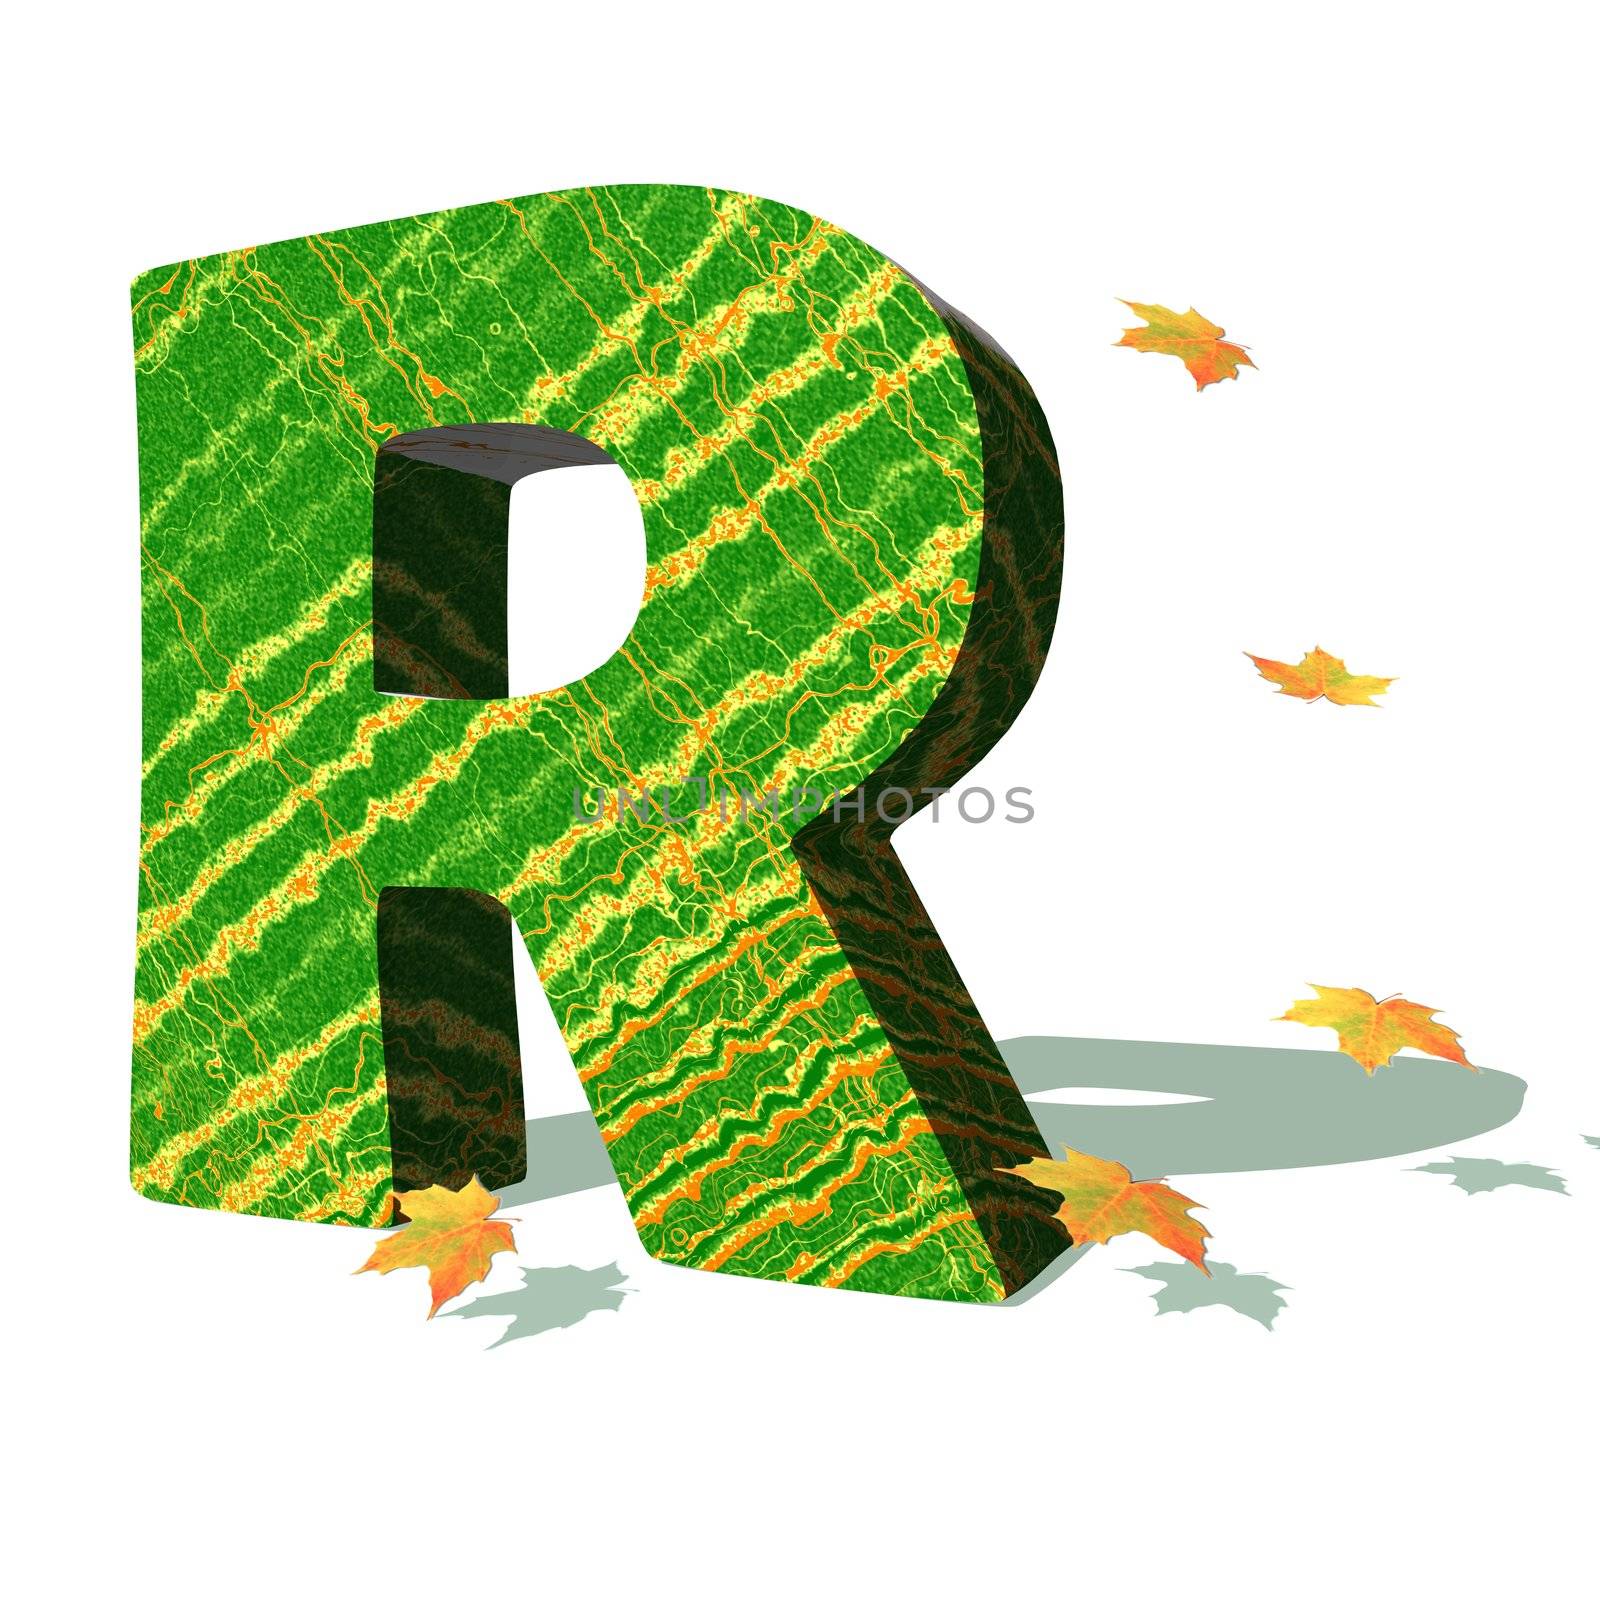 Ecological R letter by Elenaphotos21